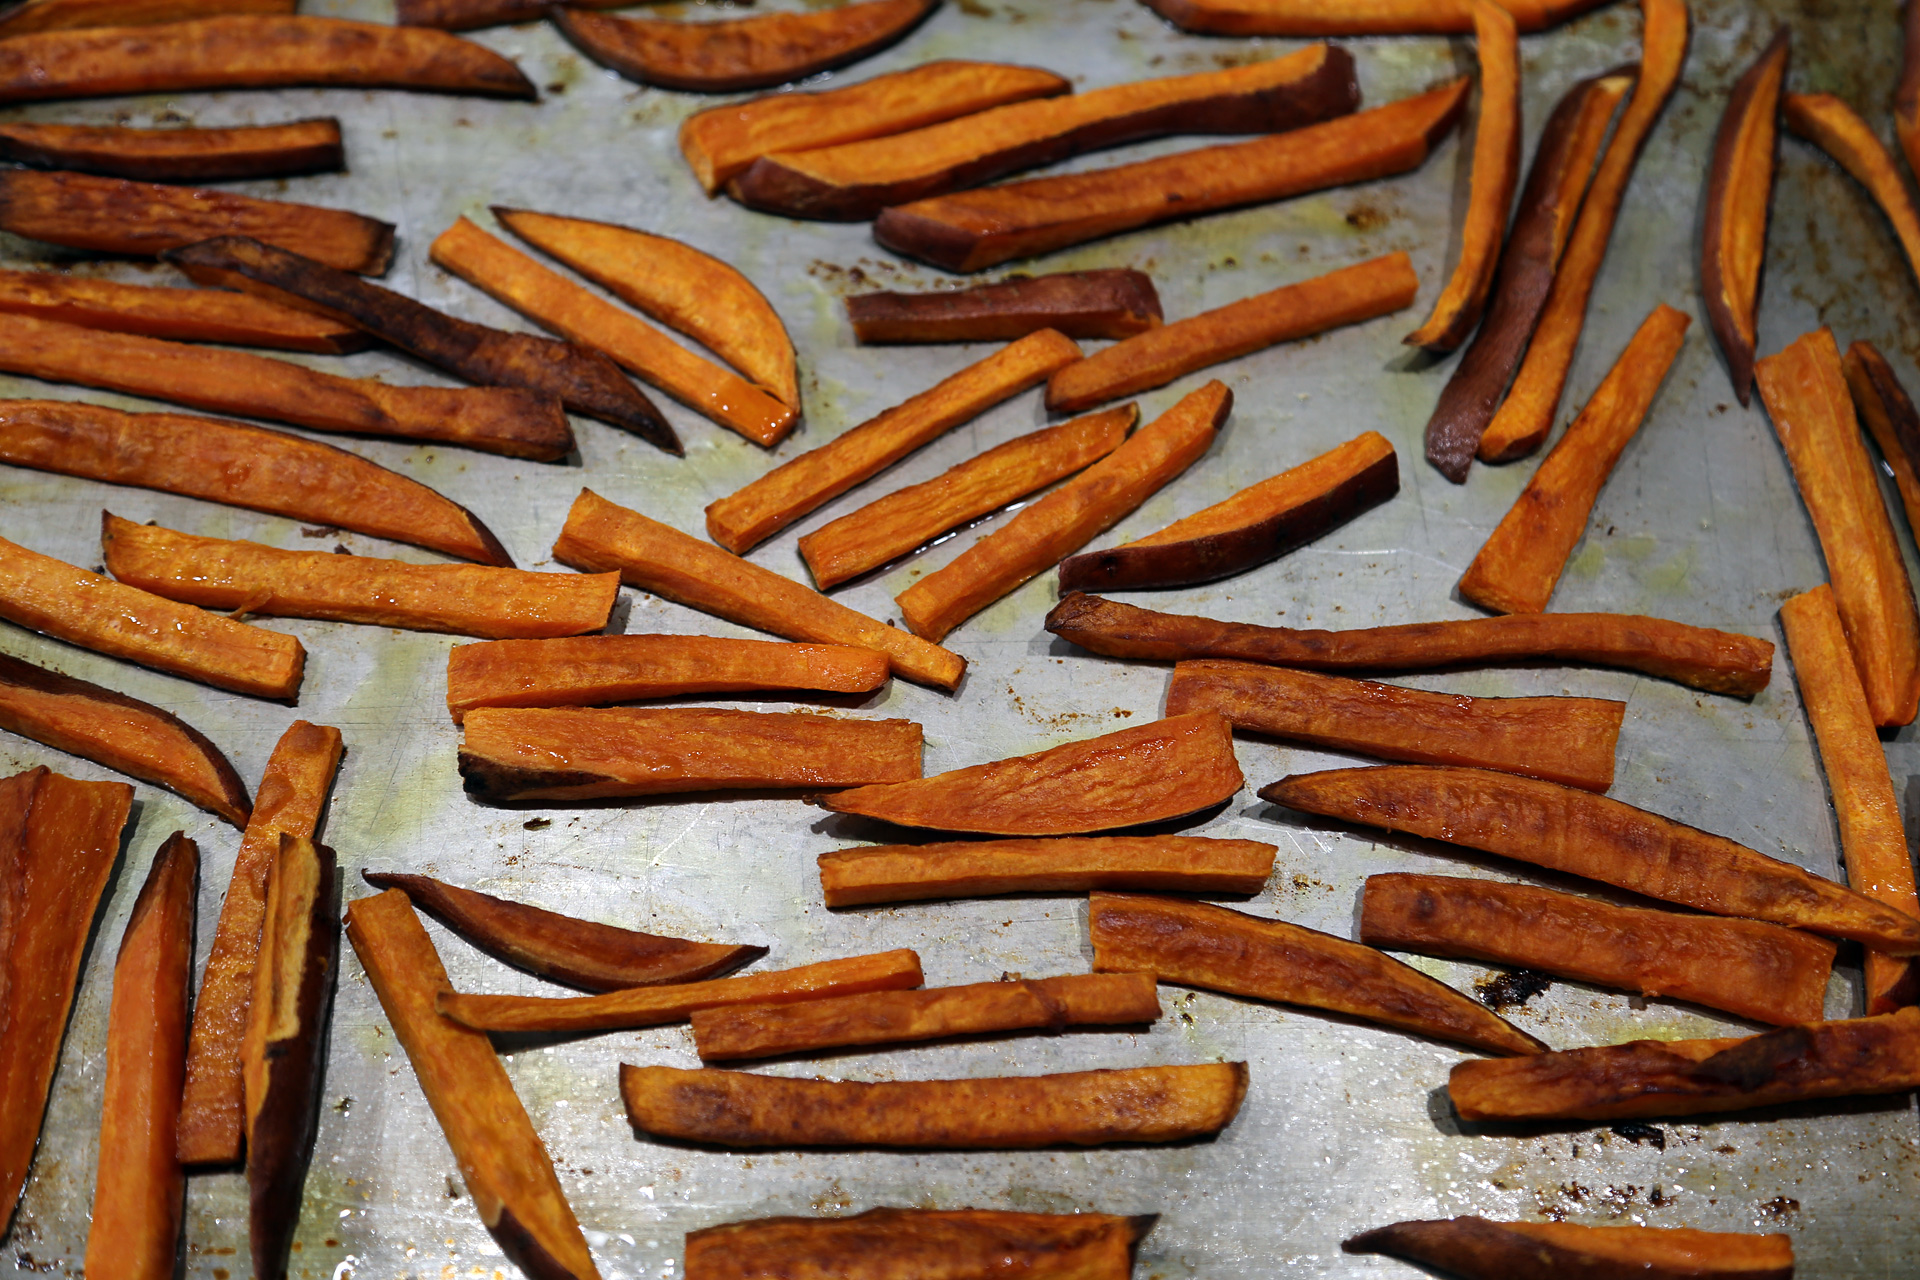 Bake, turning the sweet potatoes once or twice, until tender and golden, about 30 minutes.